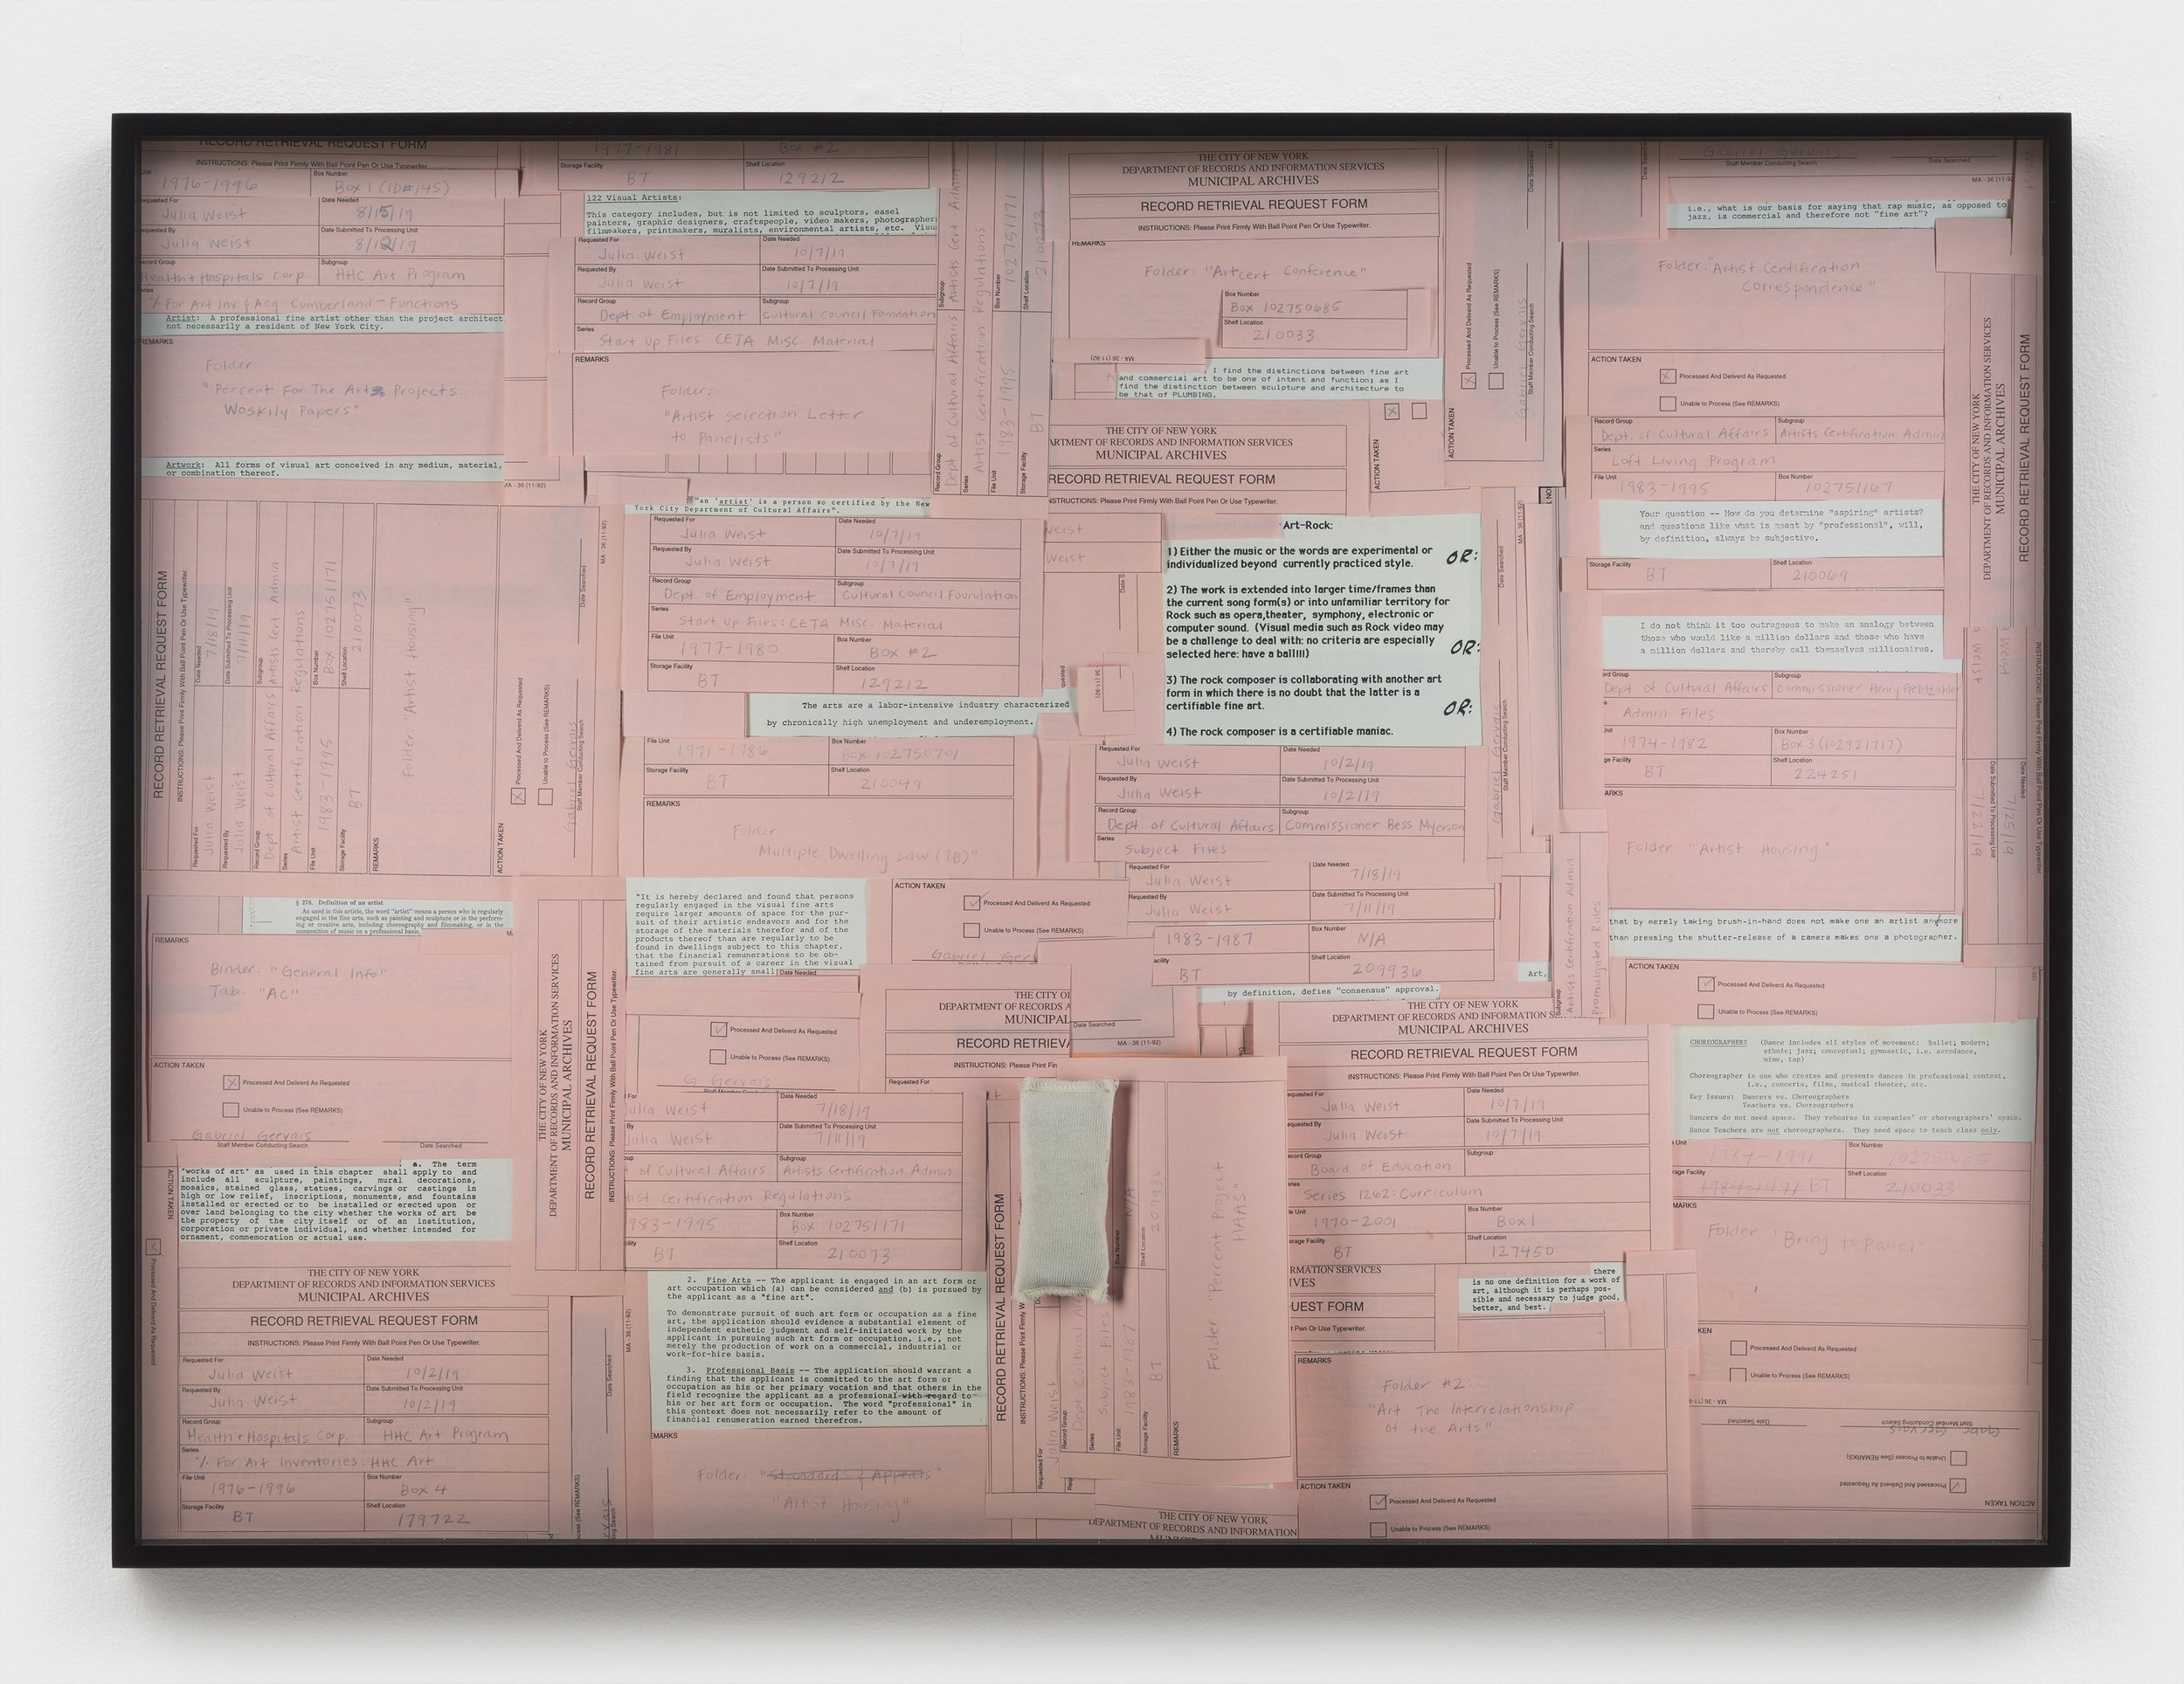   Definitions (from the series “Public Record”) , 2020&nbsp; Archival pigment print&nbsp; 29 5/8 x 39 3/4 inches (framed)&nbsp;     ABOUT PUBLIC RECORD   